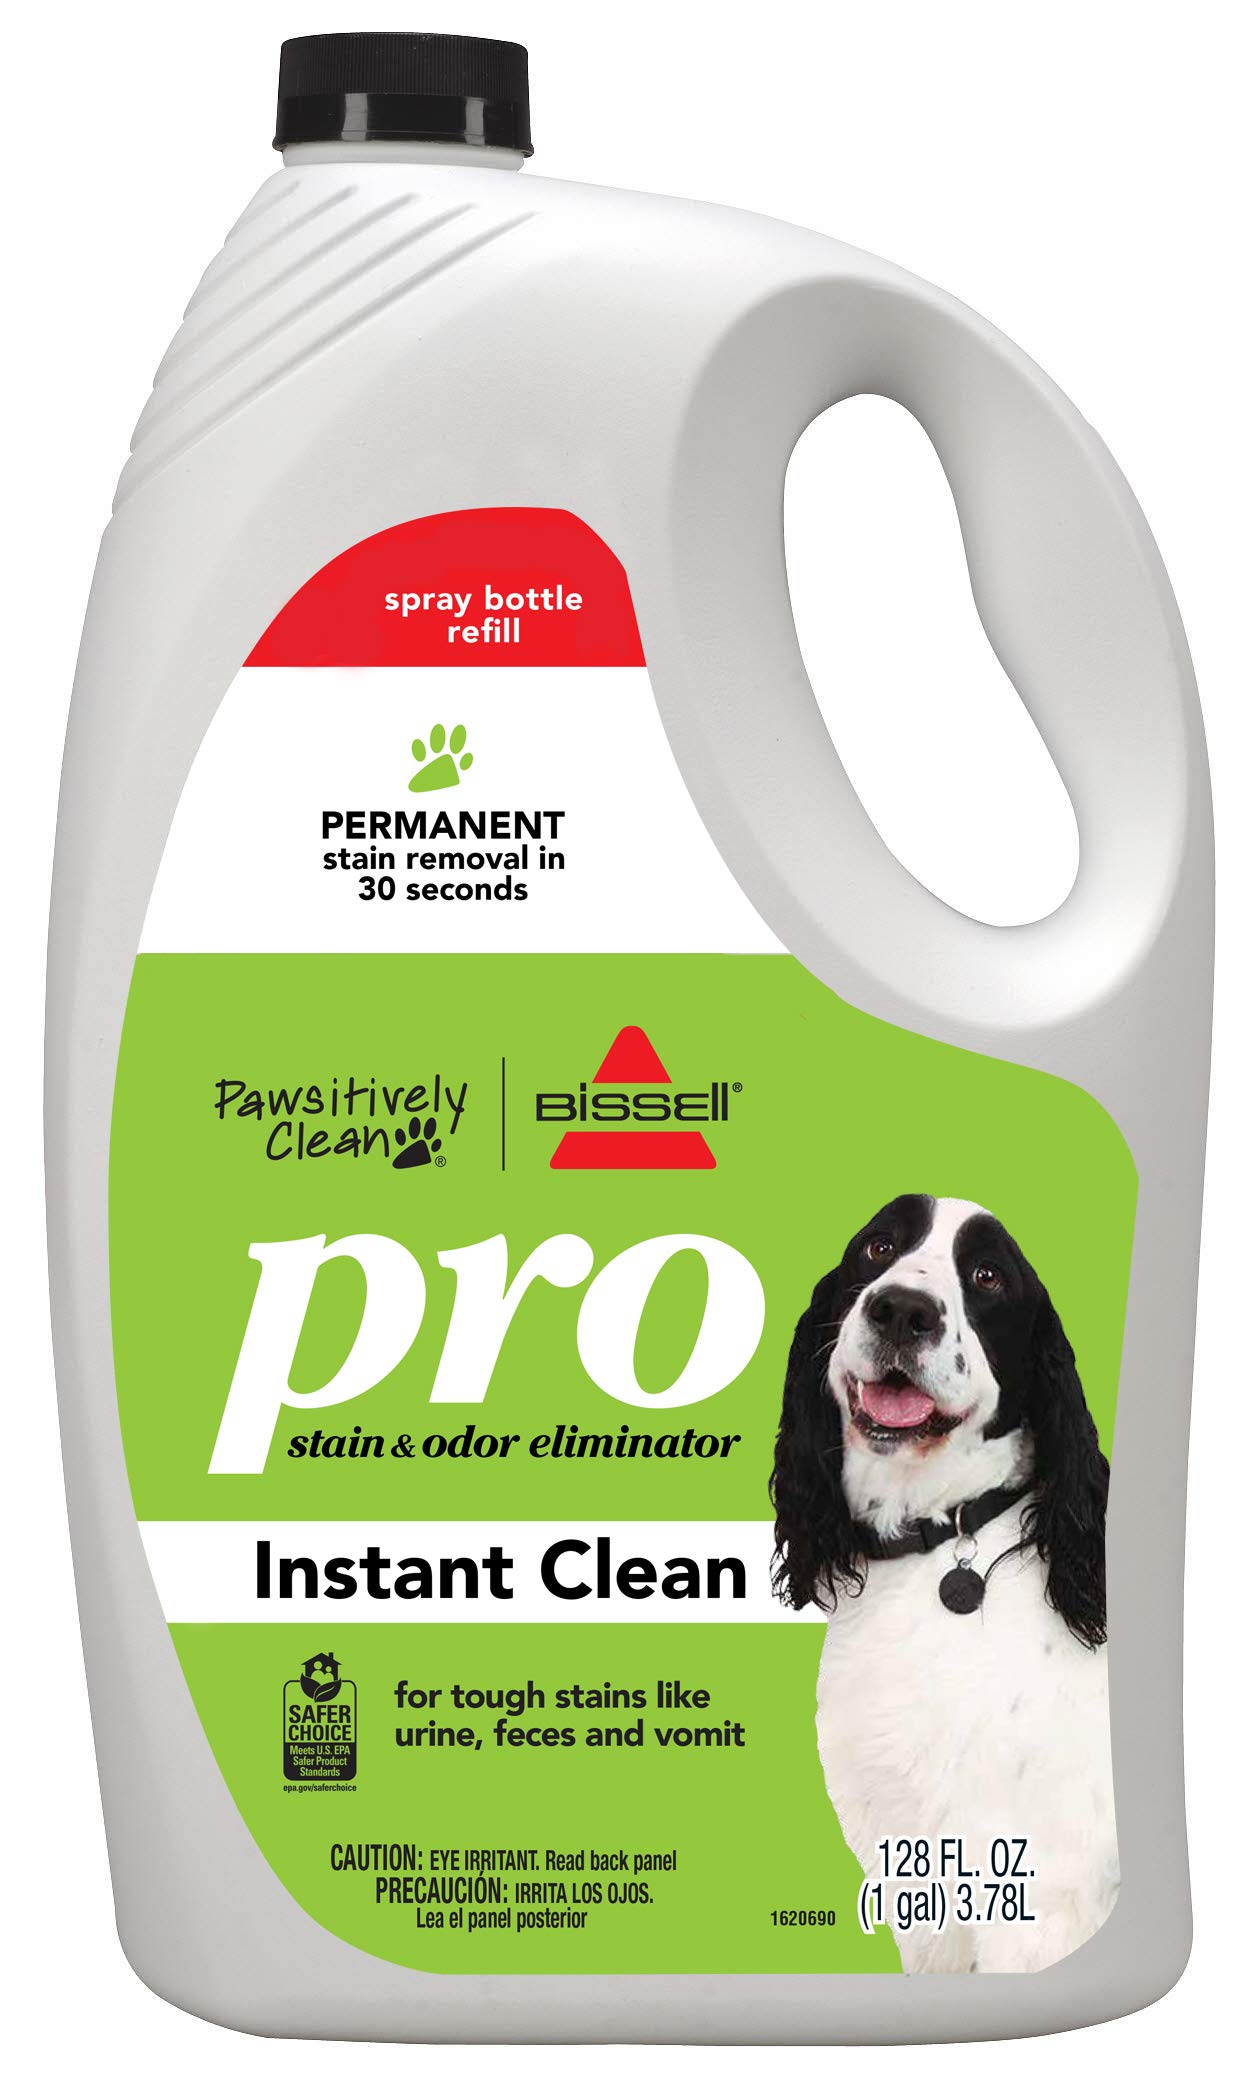 Bissell Pawsitively Clean Pro Pet Stain & Odor Eliminator Instant Clean Refill, 128oz, 2185